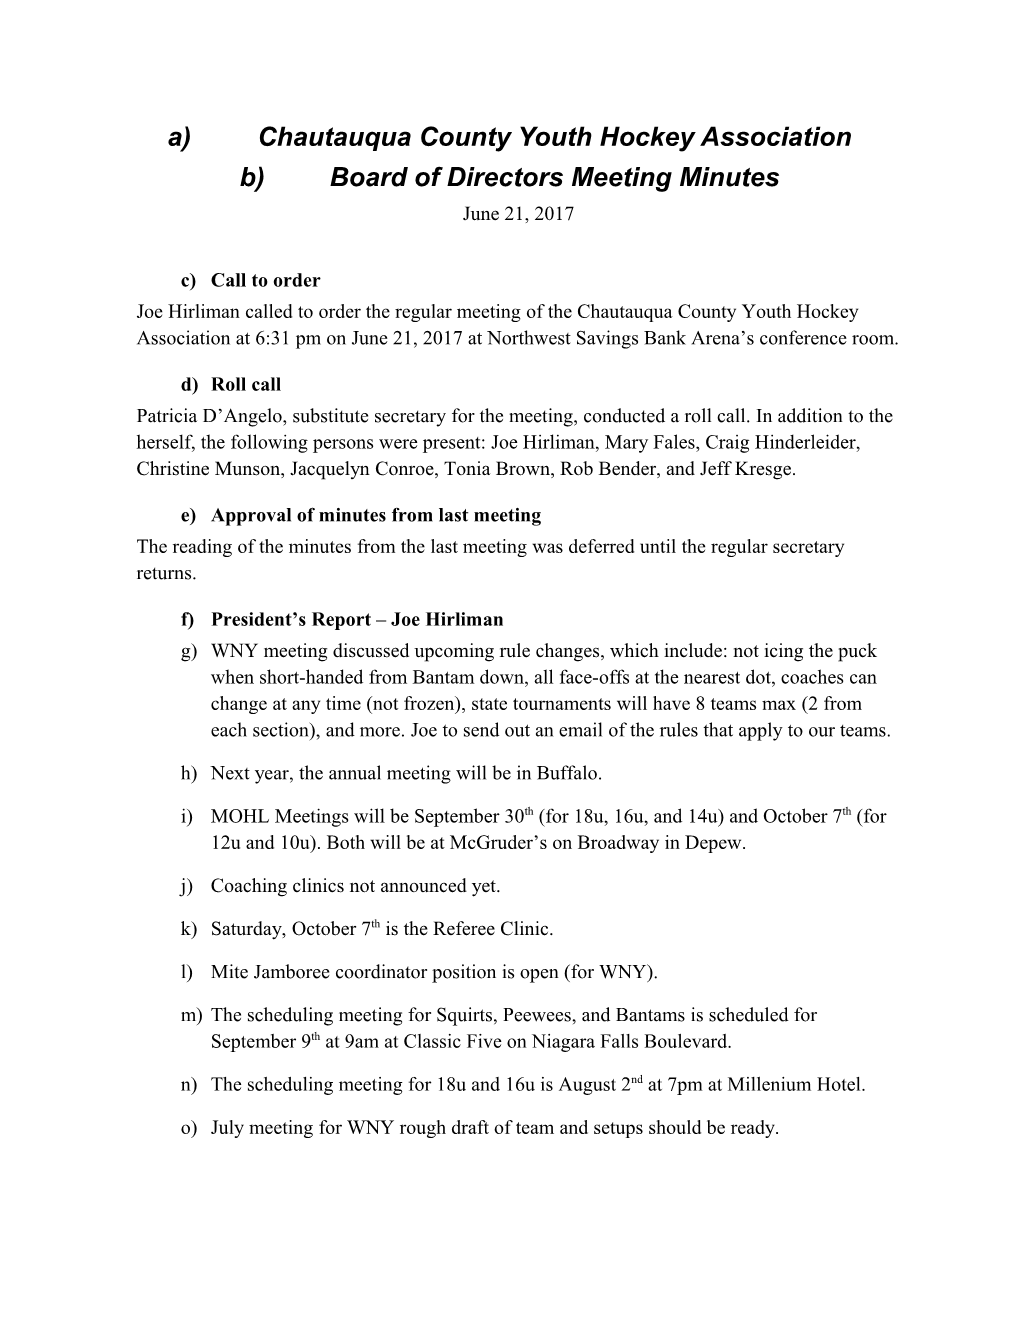 Formal Meeting Minutes s7